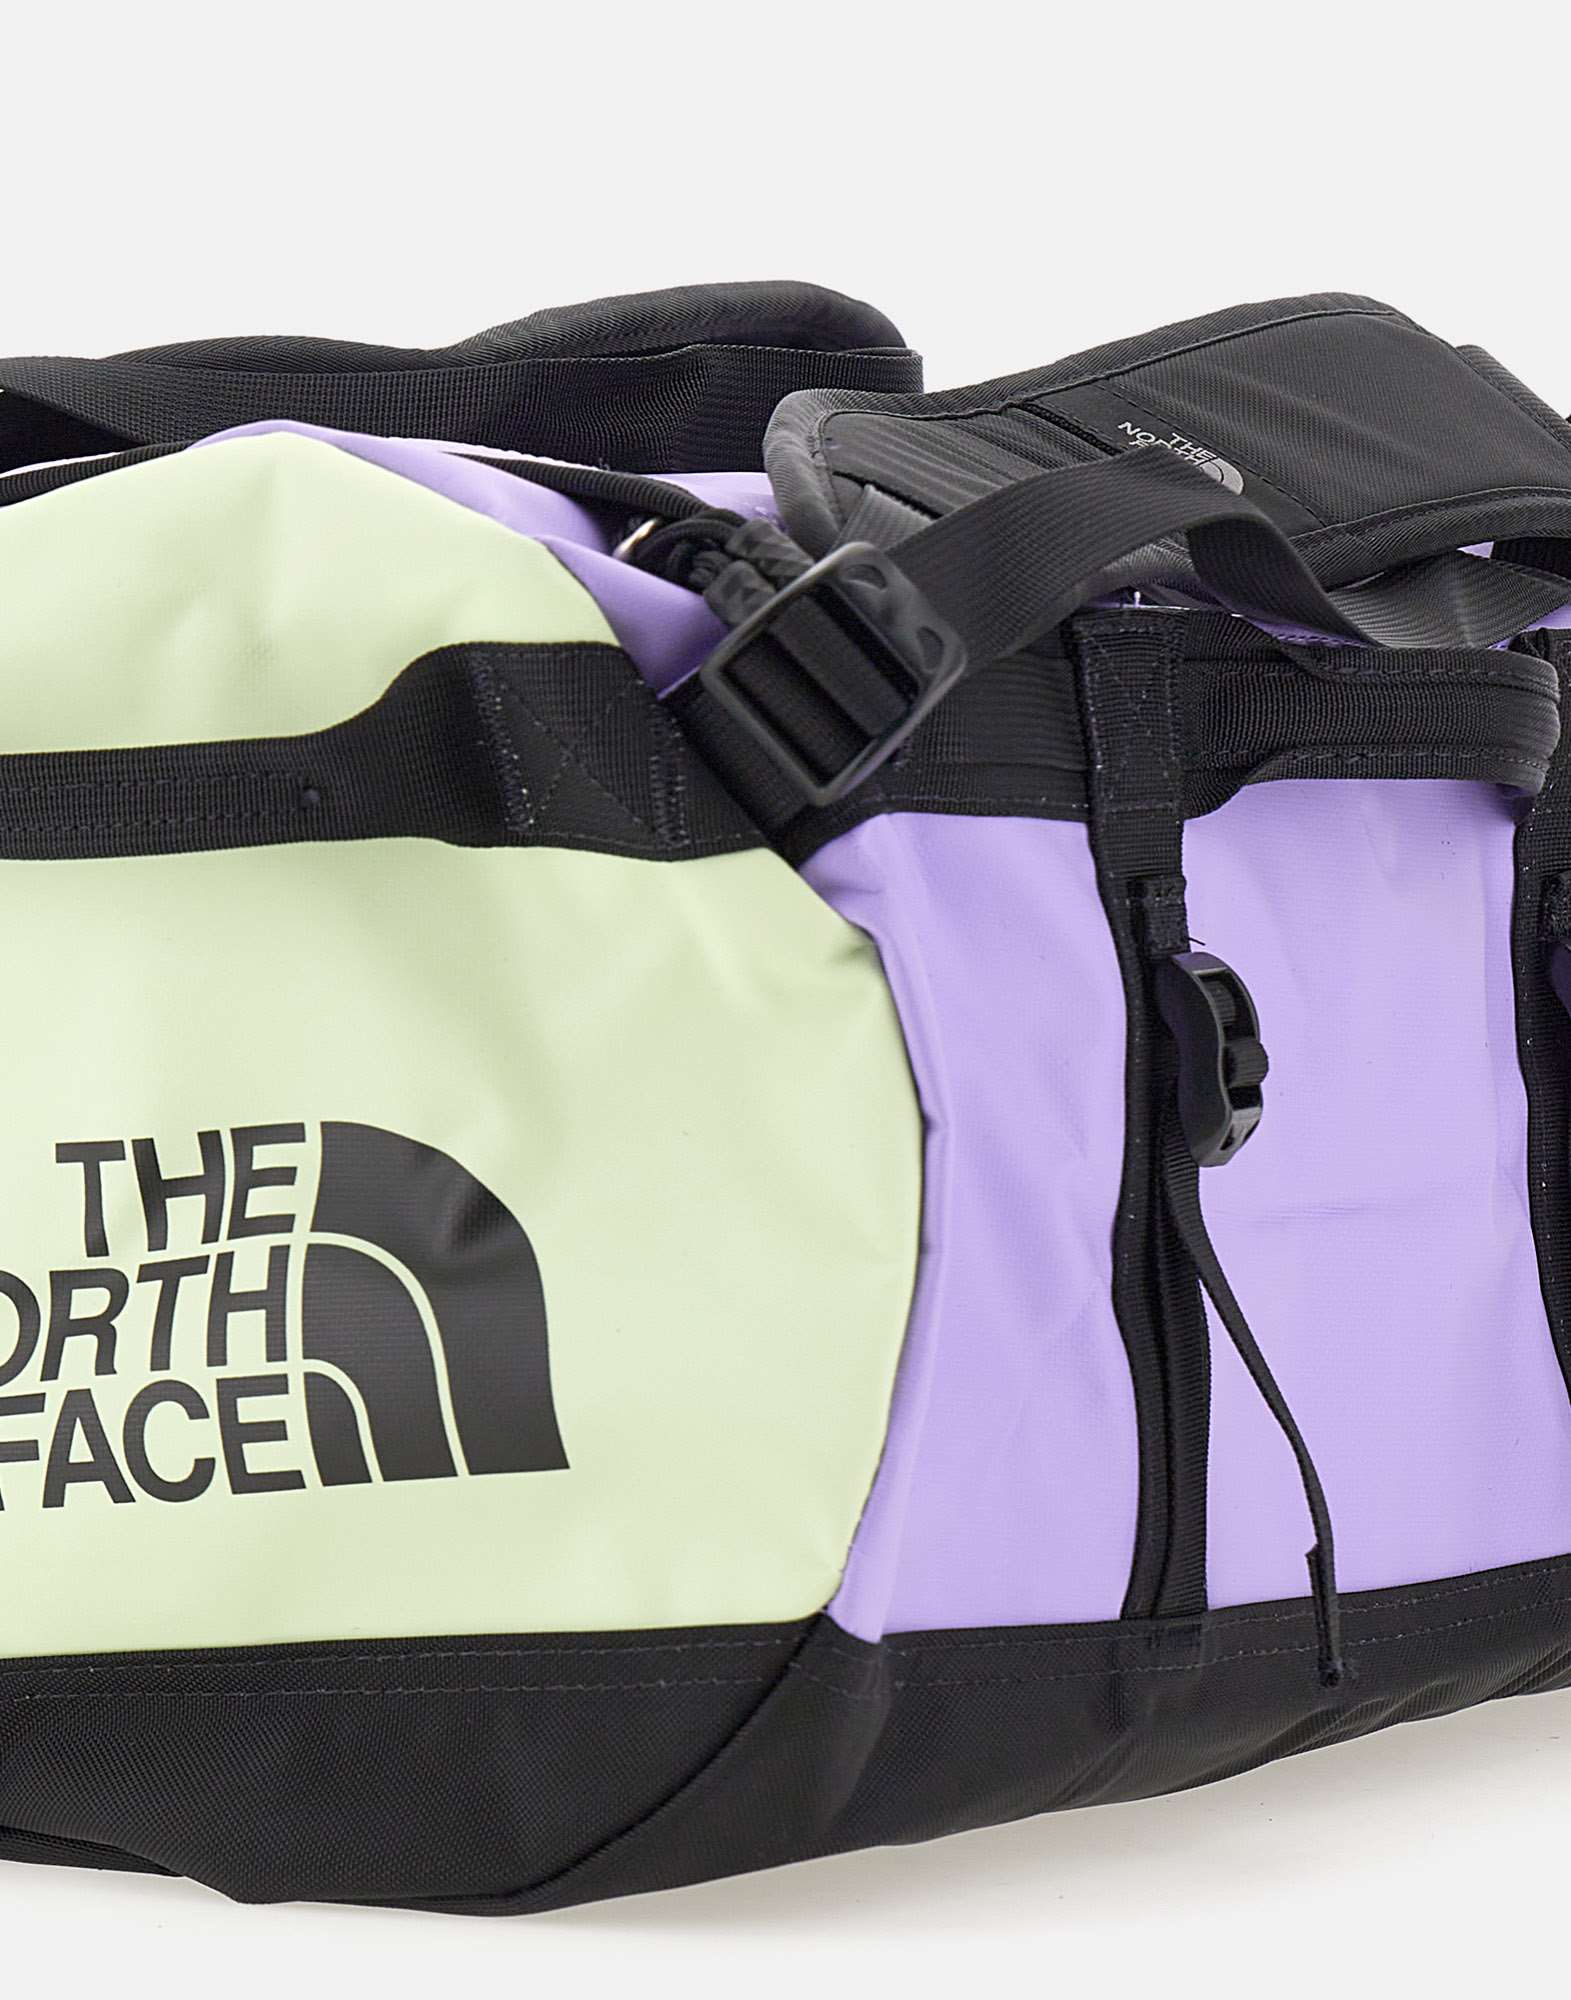 THE NORTH FACE NF0A52SS Man LILAC/GREEN Suitcases - Zuklat